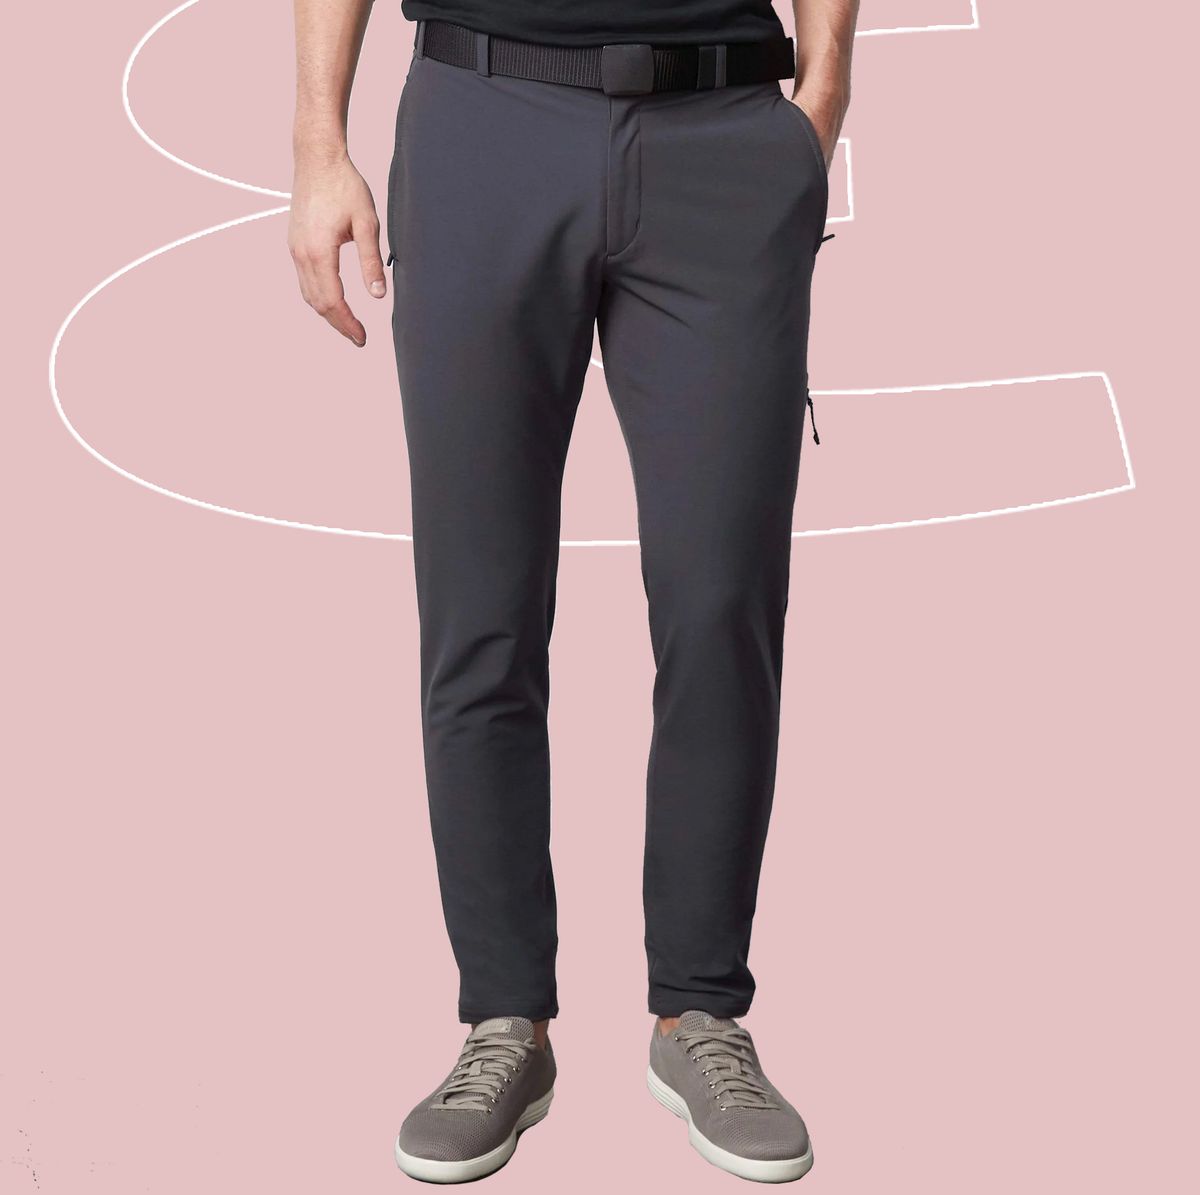 TRAVEL JOGGING PANTS - Ready to Wear